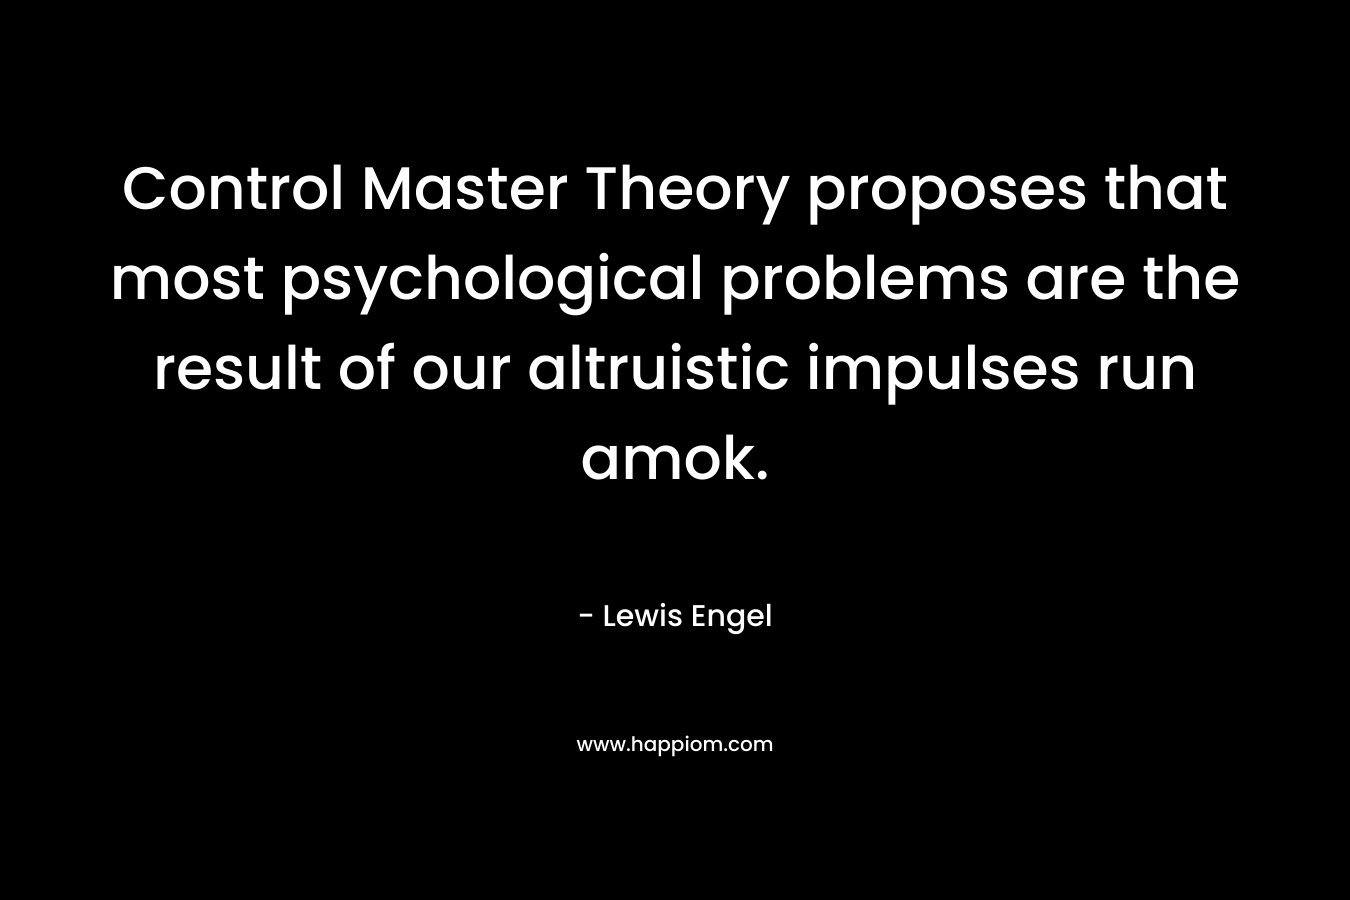 Control Master Theory proposes that most psychological problems are the result of our altruistic impulses run amok.